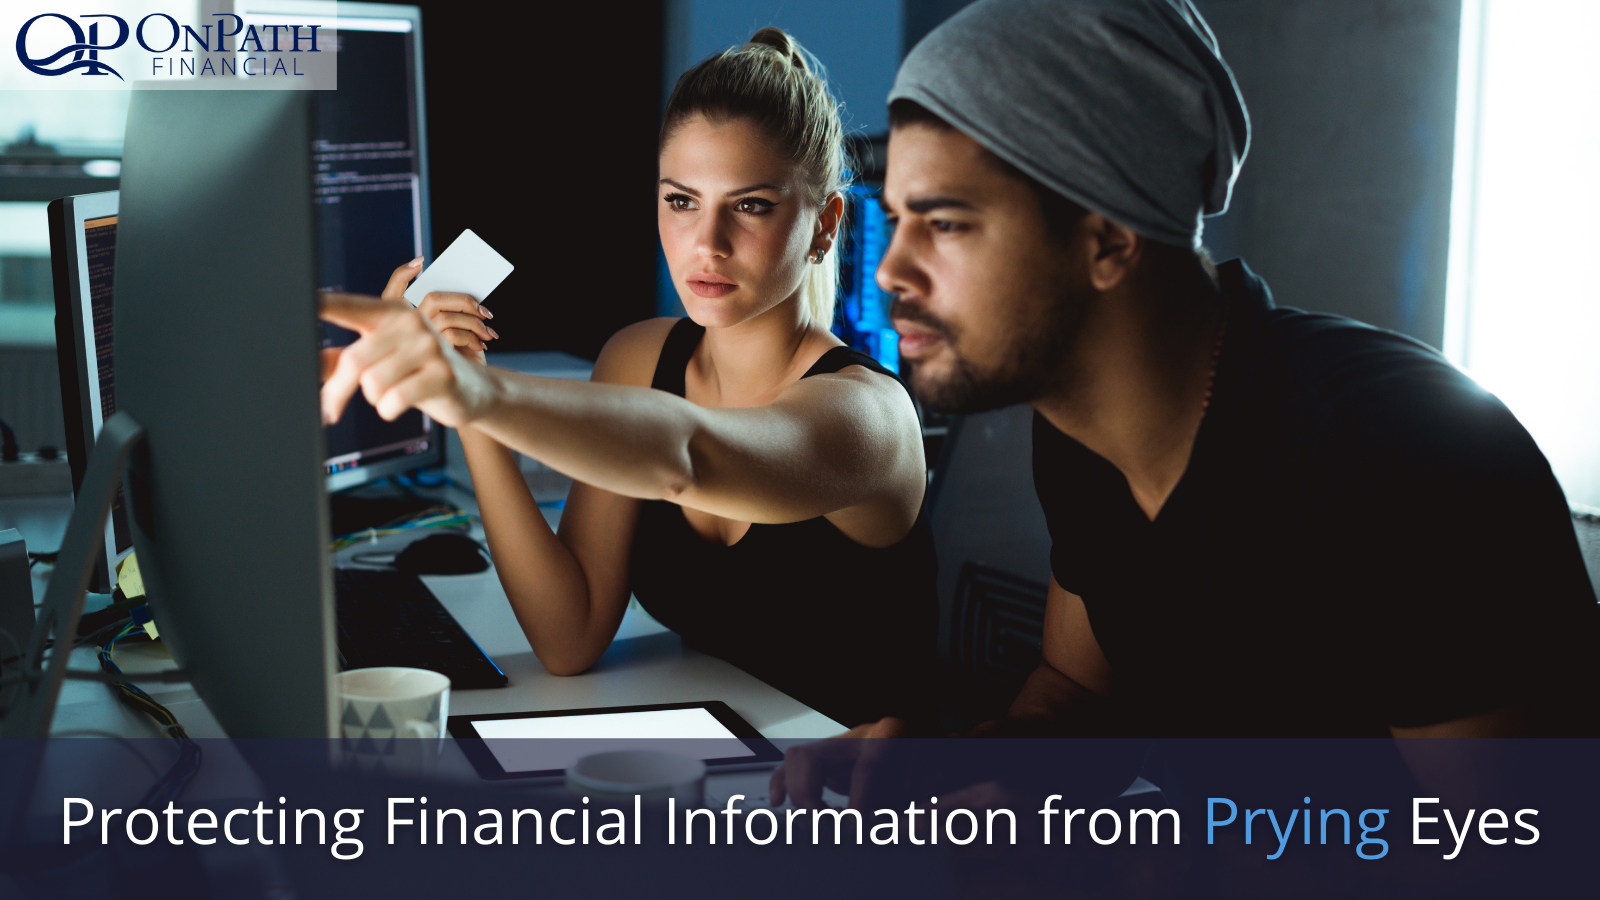 Protecting financial information from prying eyes